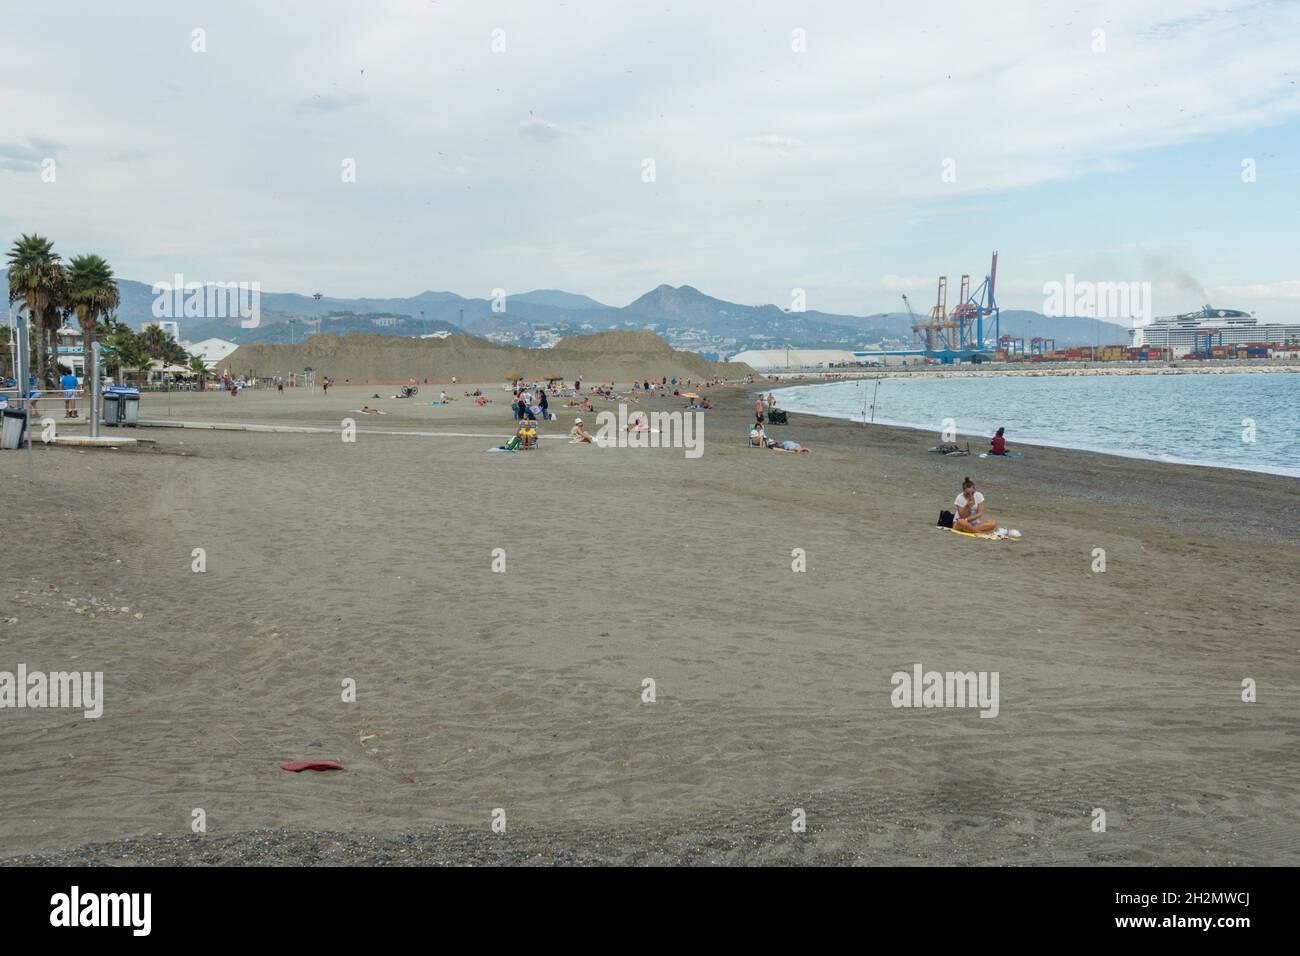 People on Huelin beach in autumn, with the industrial setting cargo port and cranes behind, Malaga, Costa del sol, Spain. Stock Photo